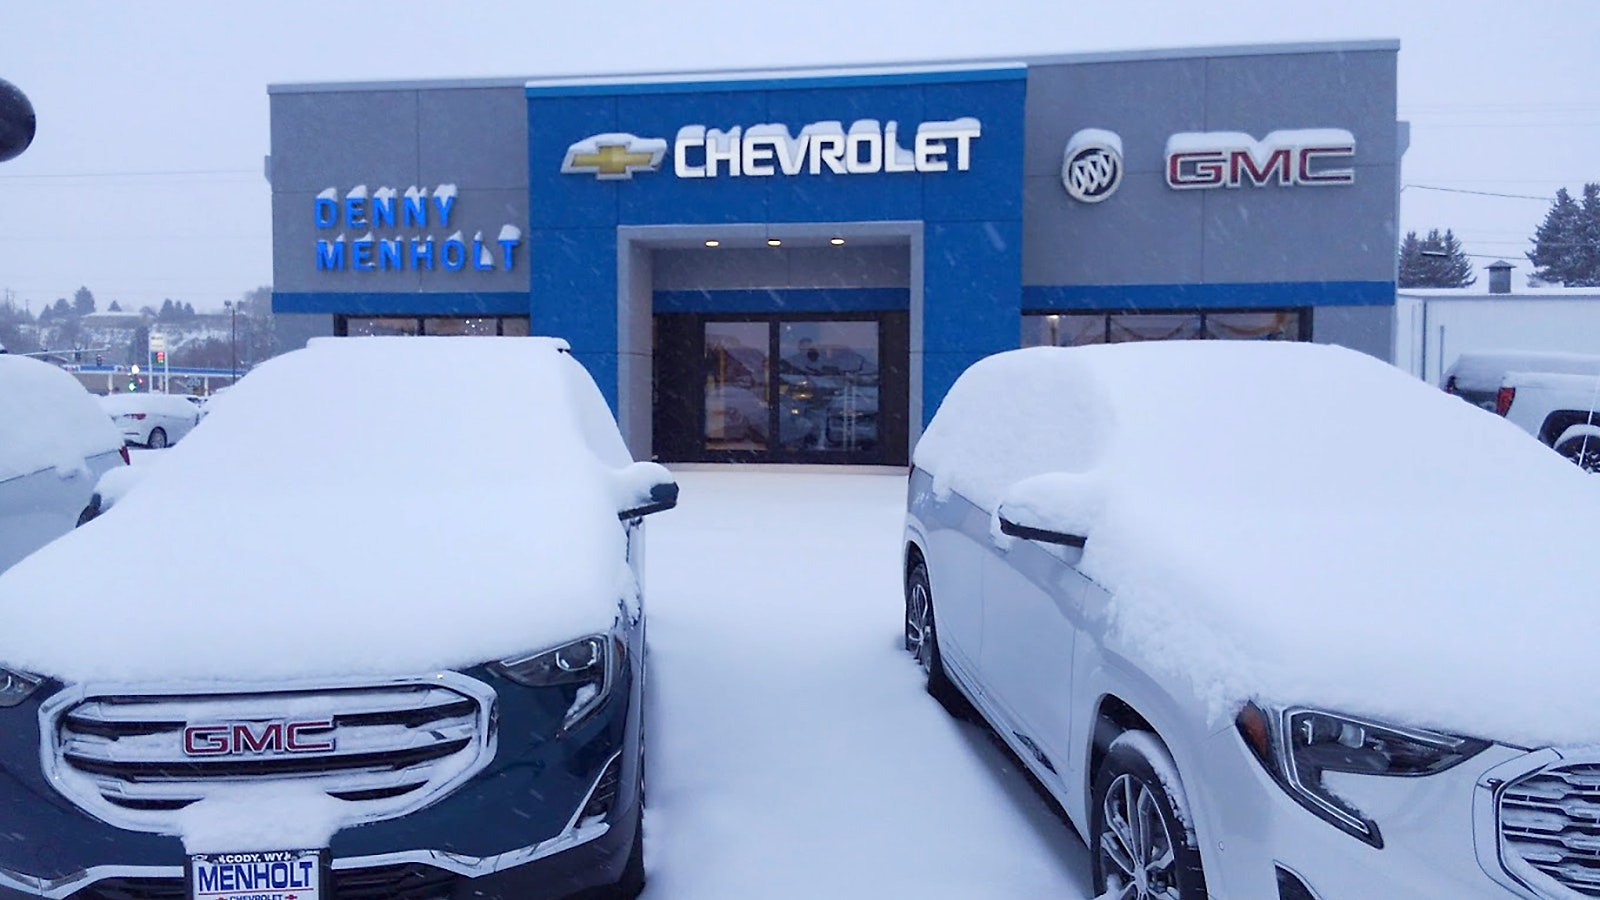 Denny Menholt Chevrolet GMC in Cody is one of two Wyoming dealerships to drop the Buick brand over EV regulations.